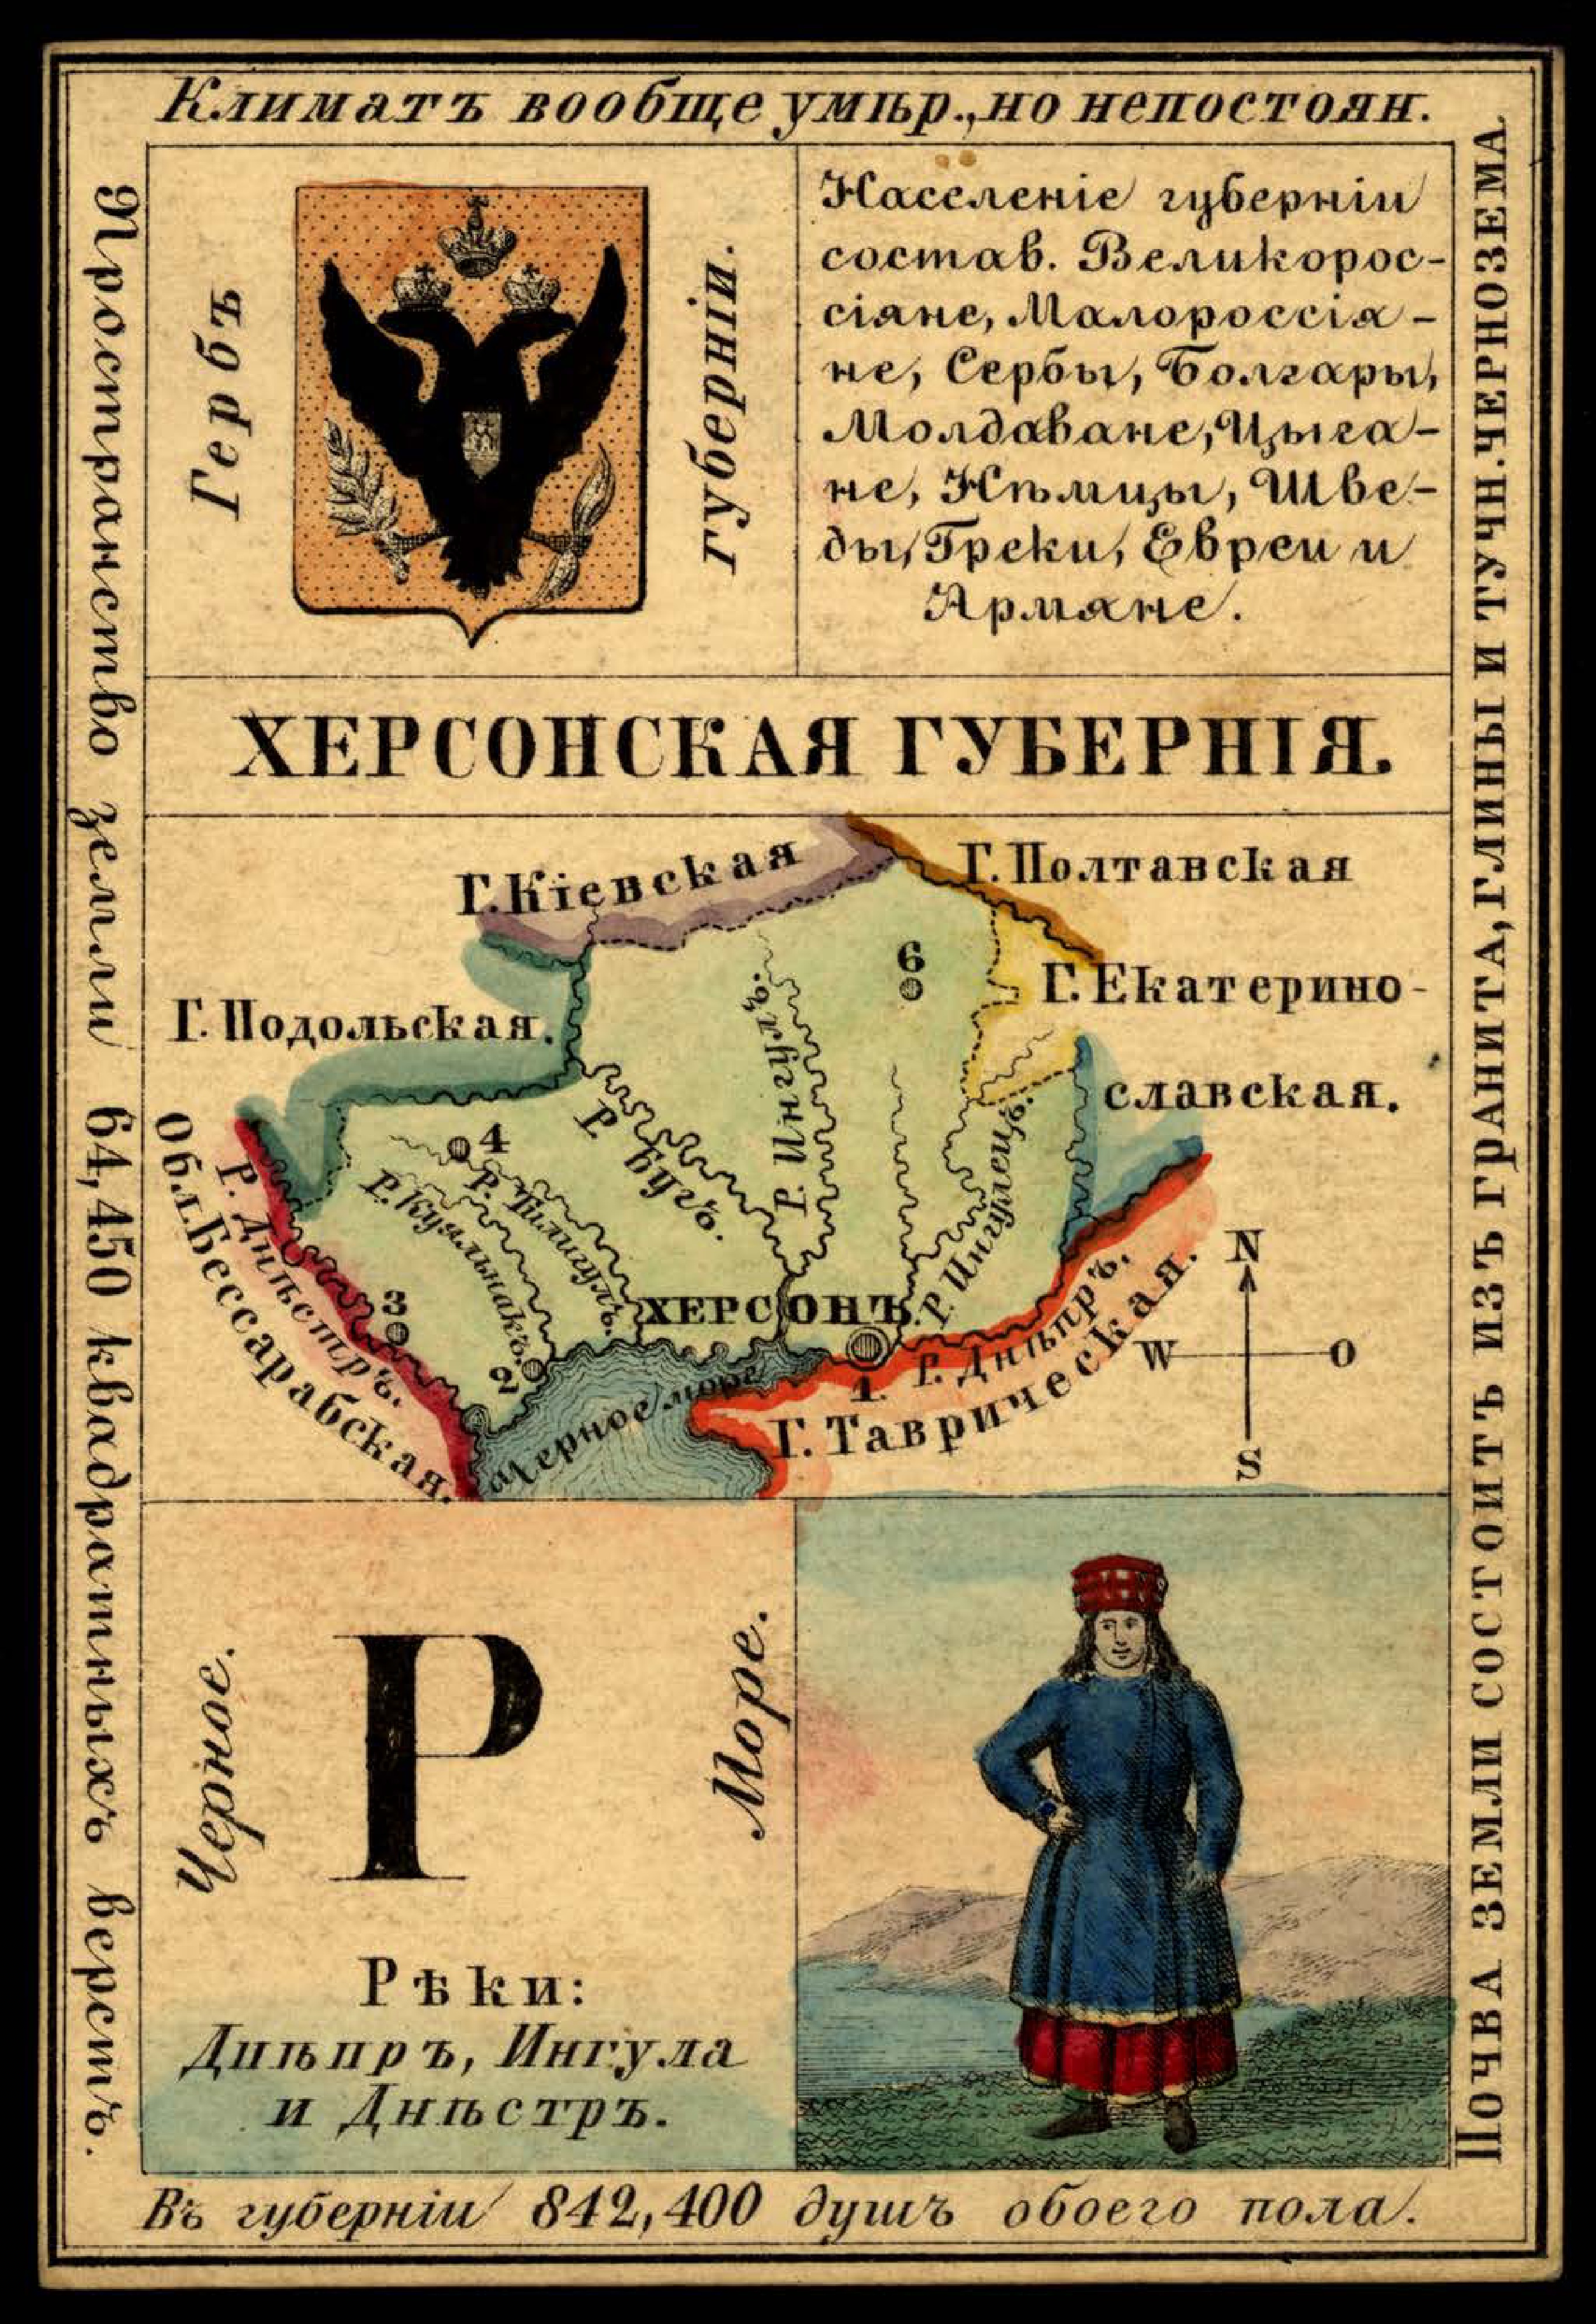 1856. Card from set of geographical cards of the Russian Empire 146